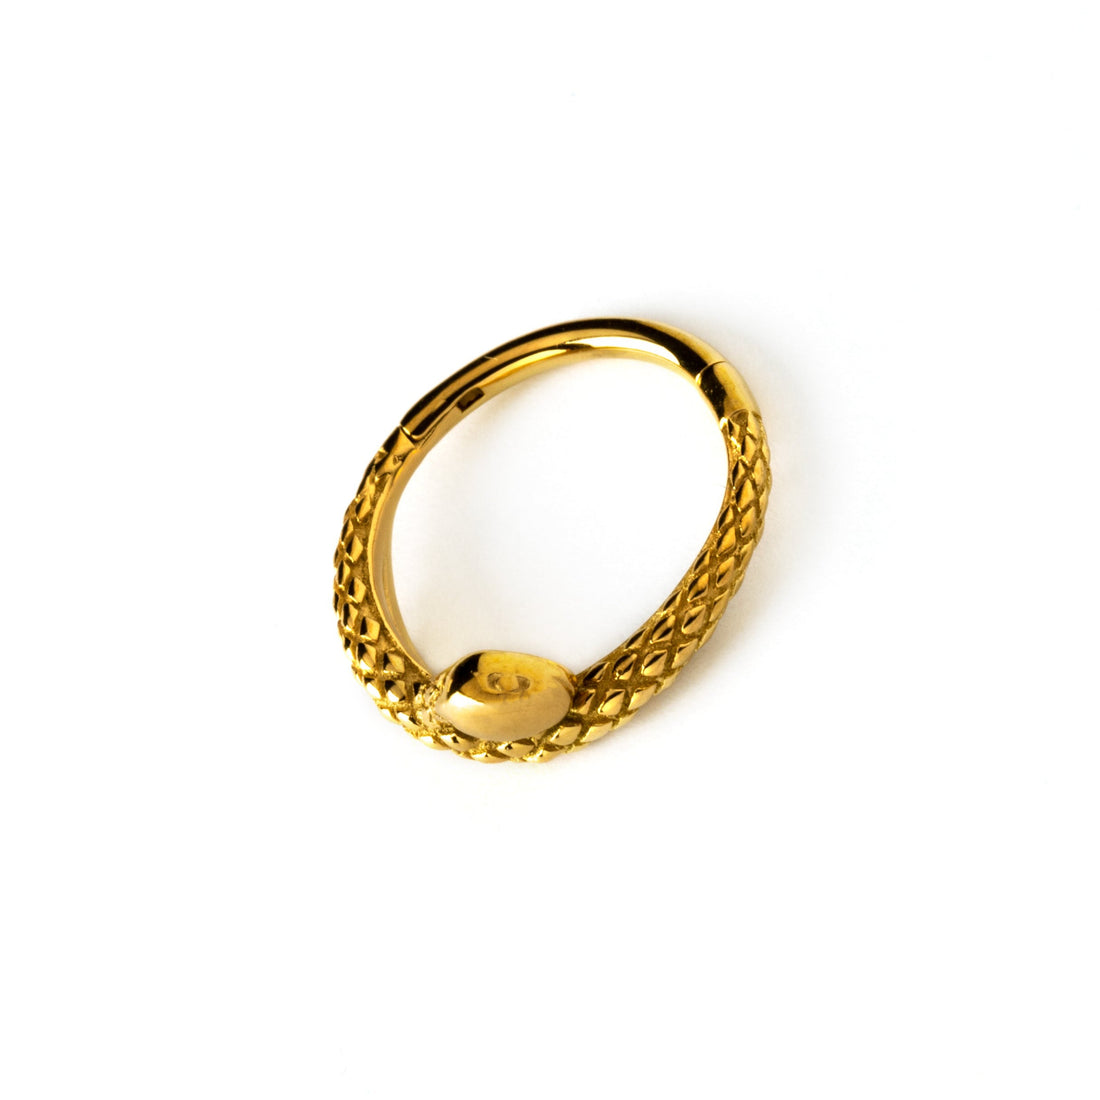 surgical steel with gold coating clicker piercing ring side view